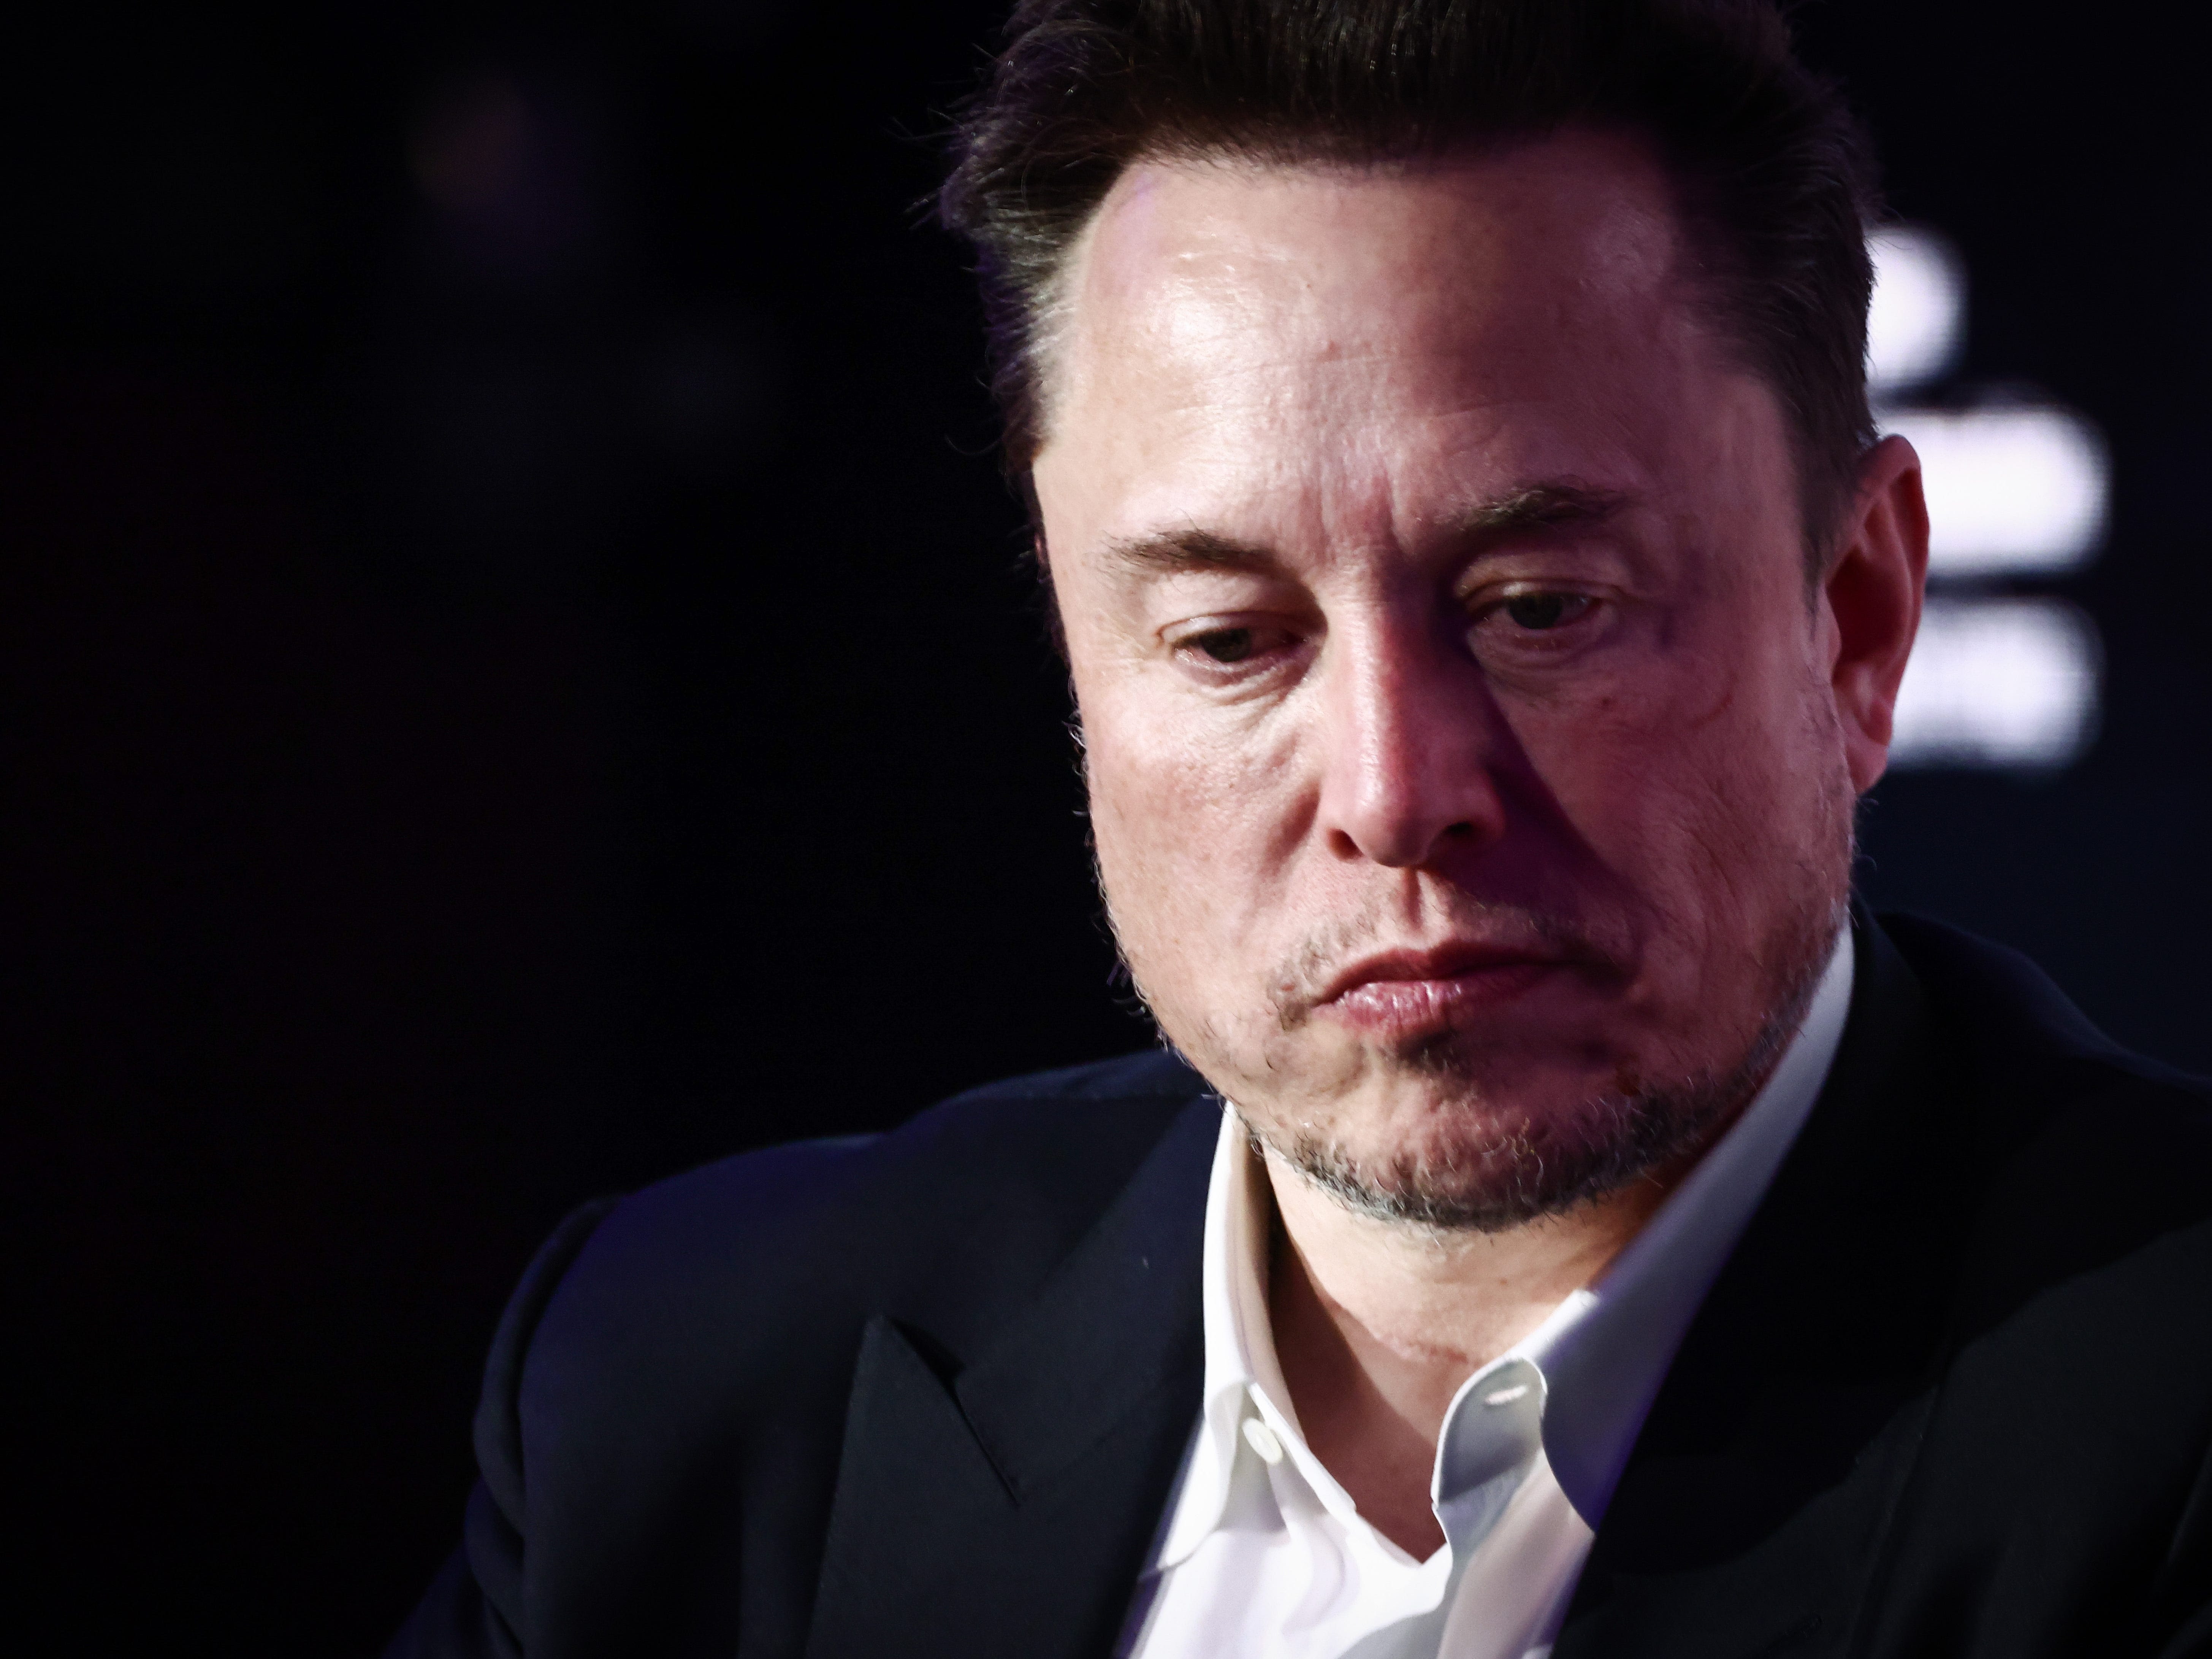 Another top proxy advisor has recommended shareholders vote against Elon Musk's $56 billion Tesla pay package